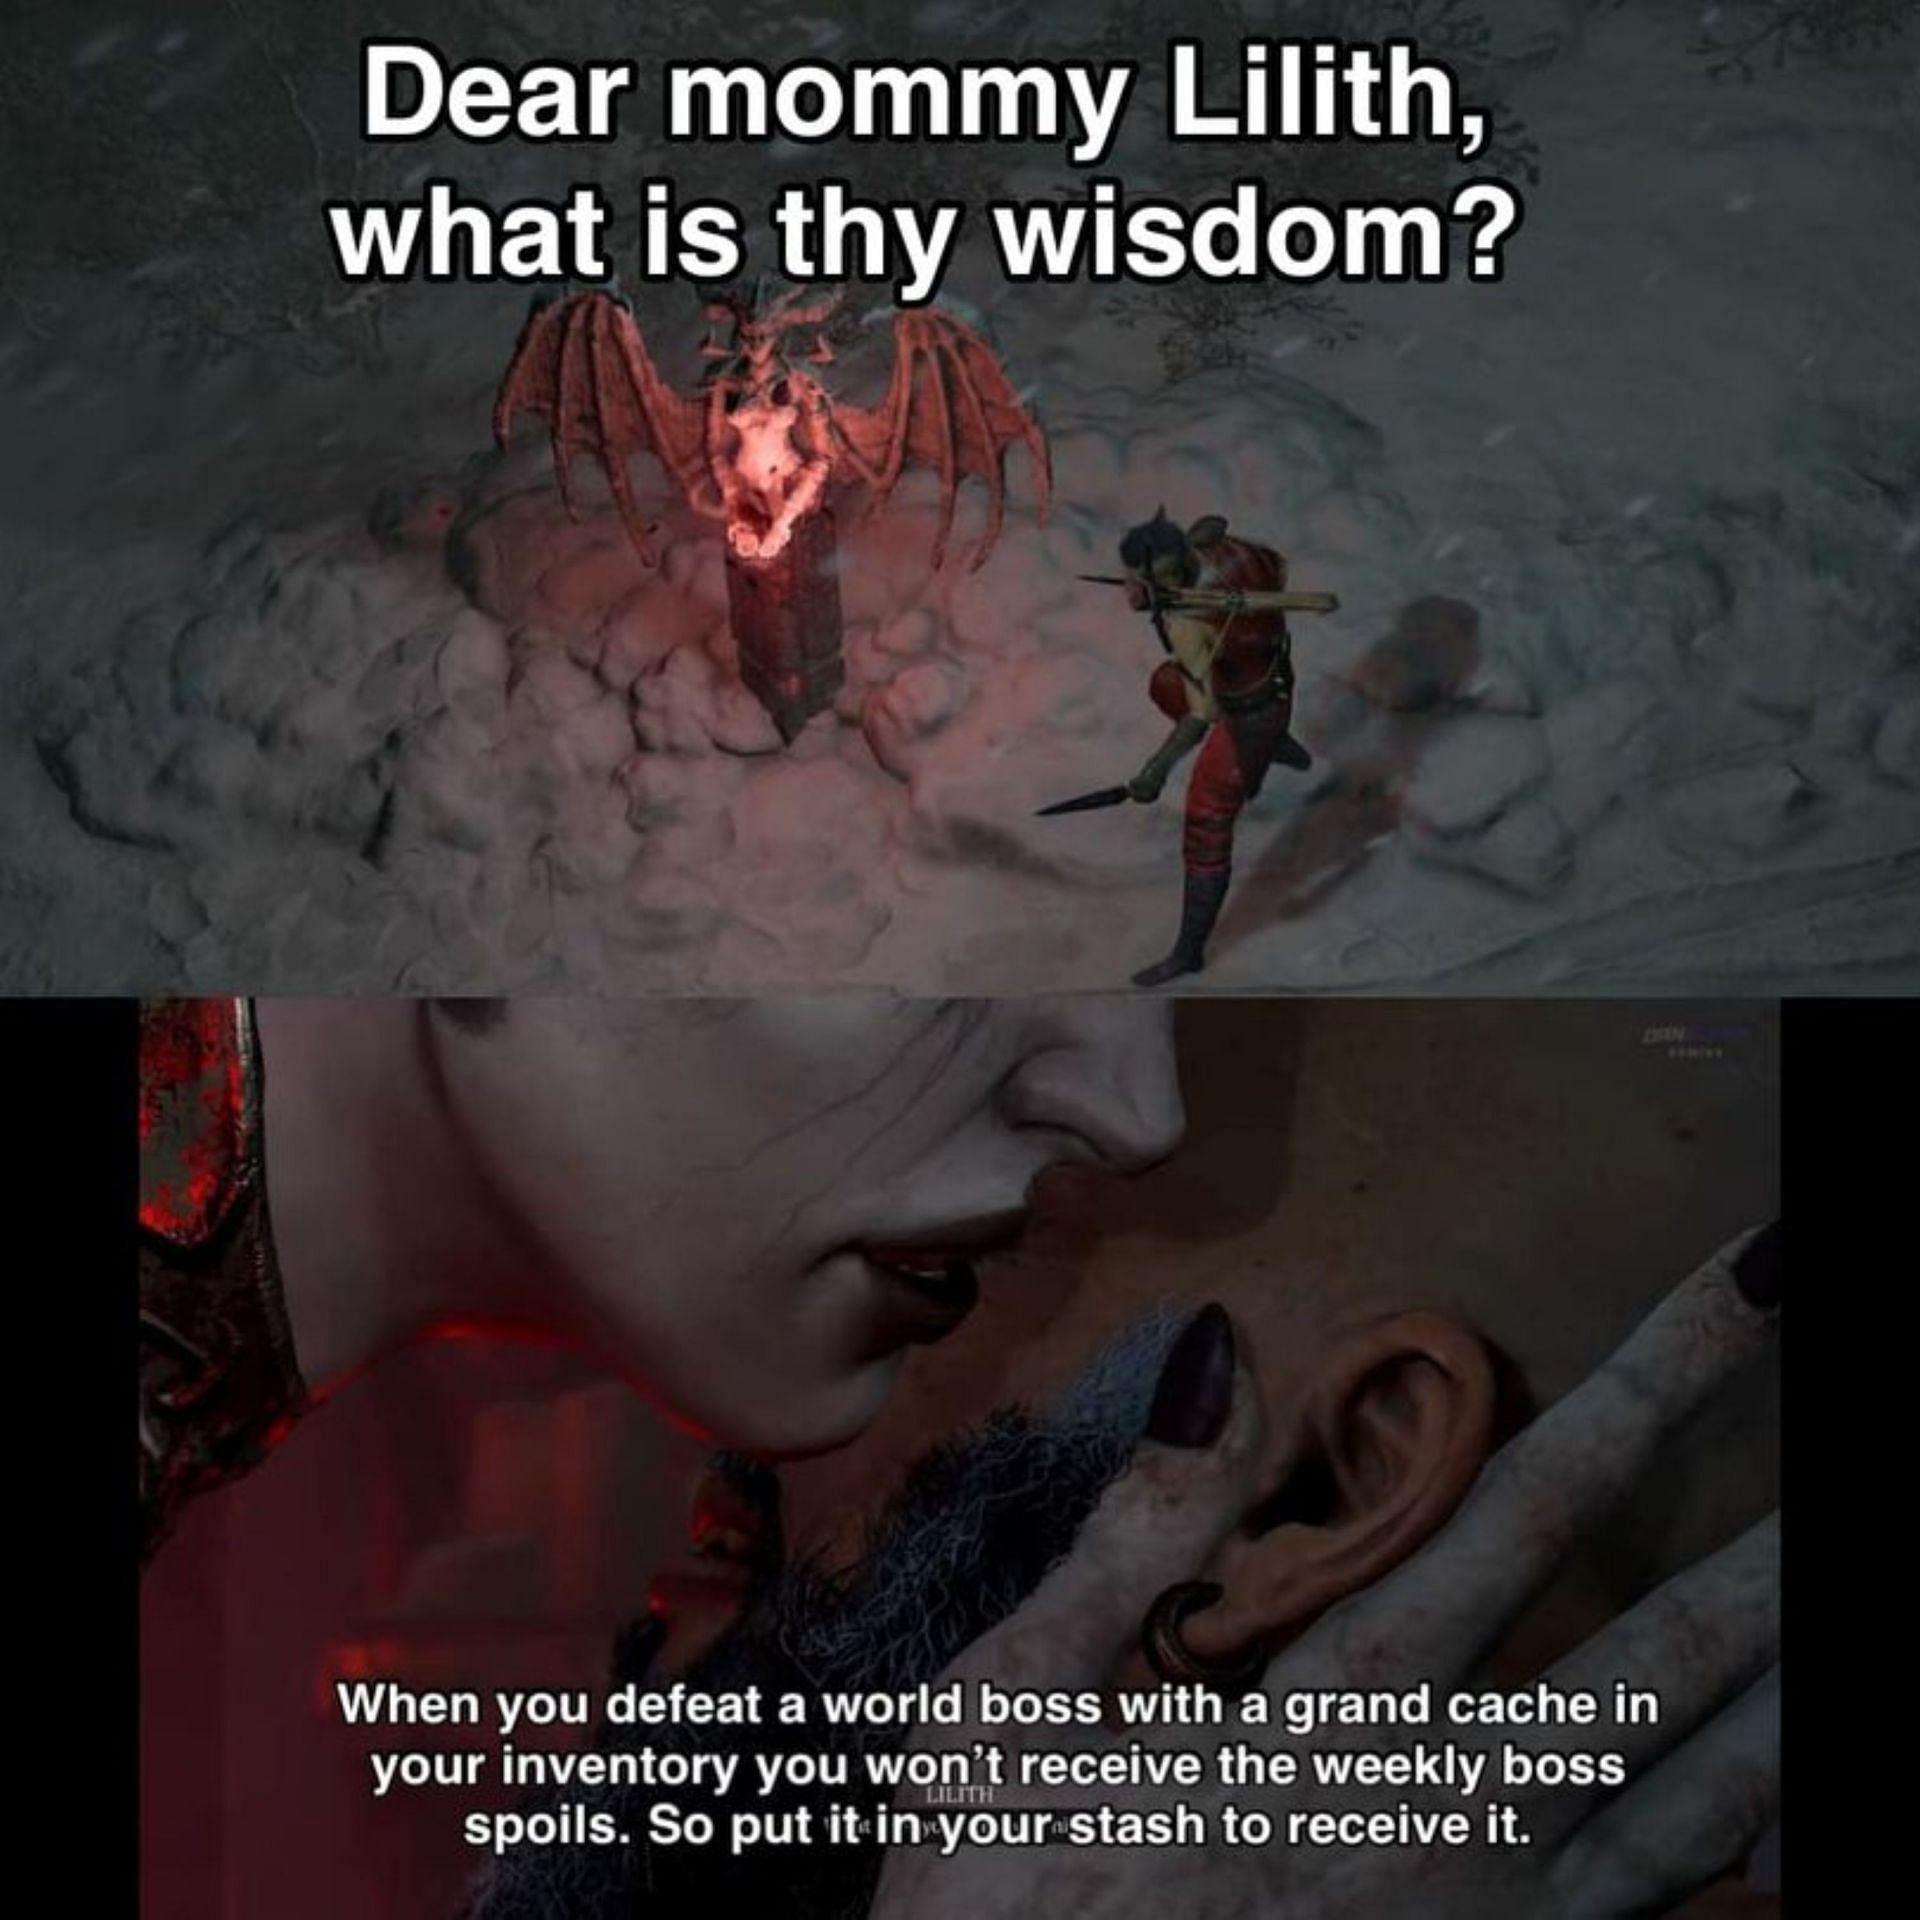 Listen to Mother Lilith, for she is wise (Image via Facebook)